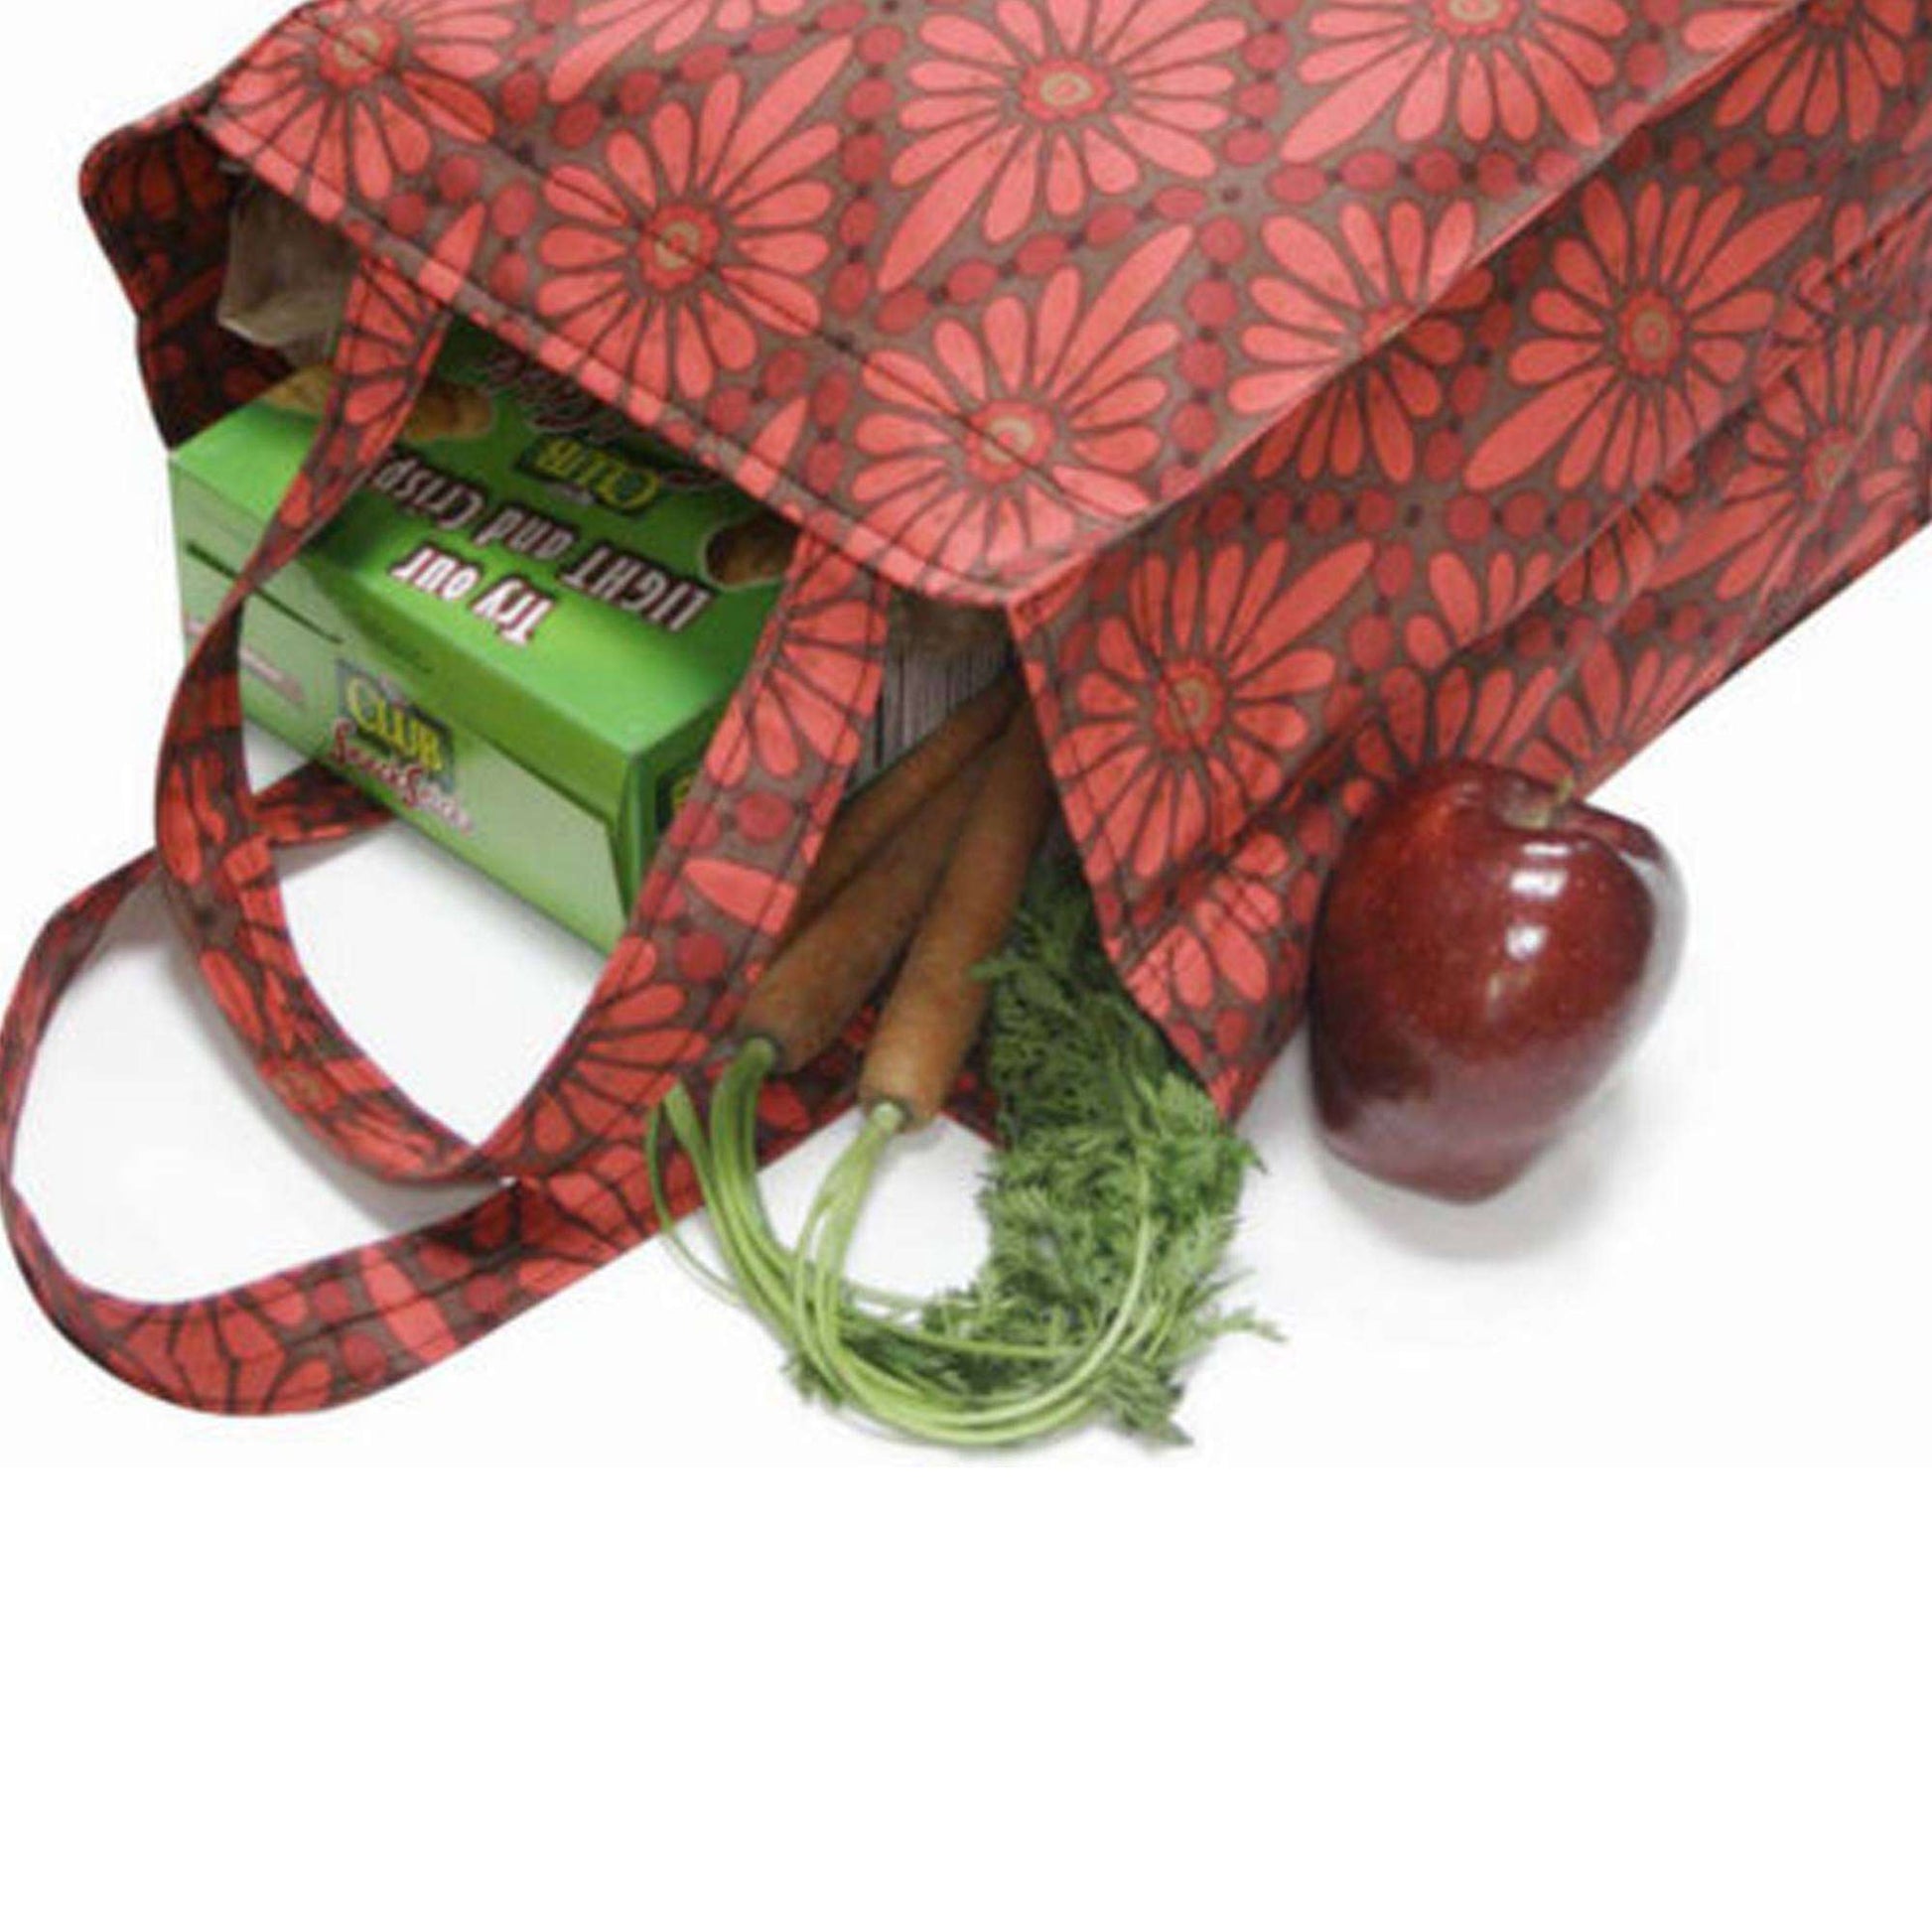 Free Coats & Clark Sewing Reusable Grocery Bag Pattern